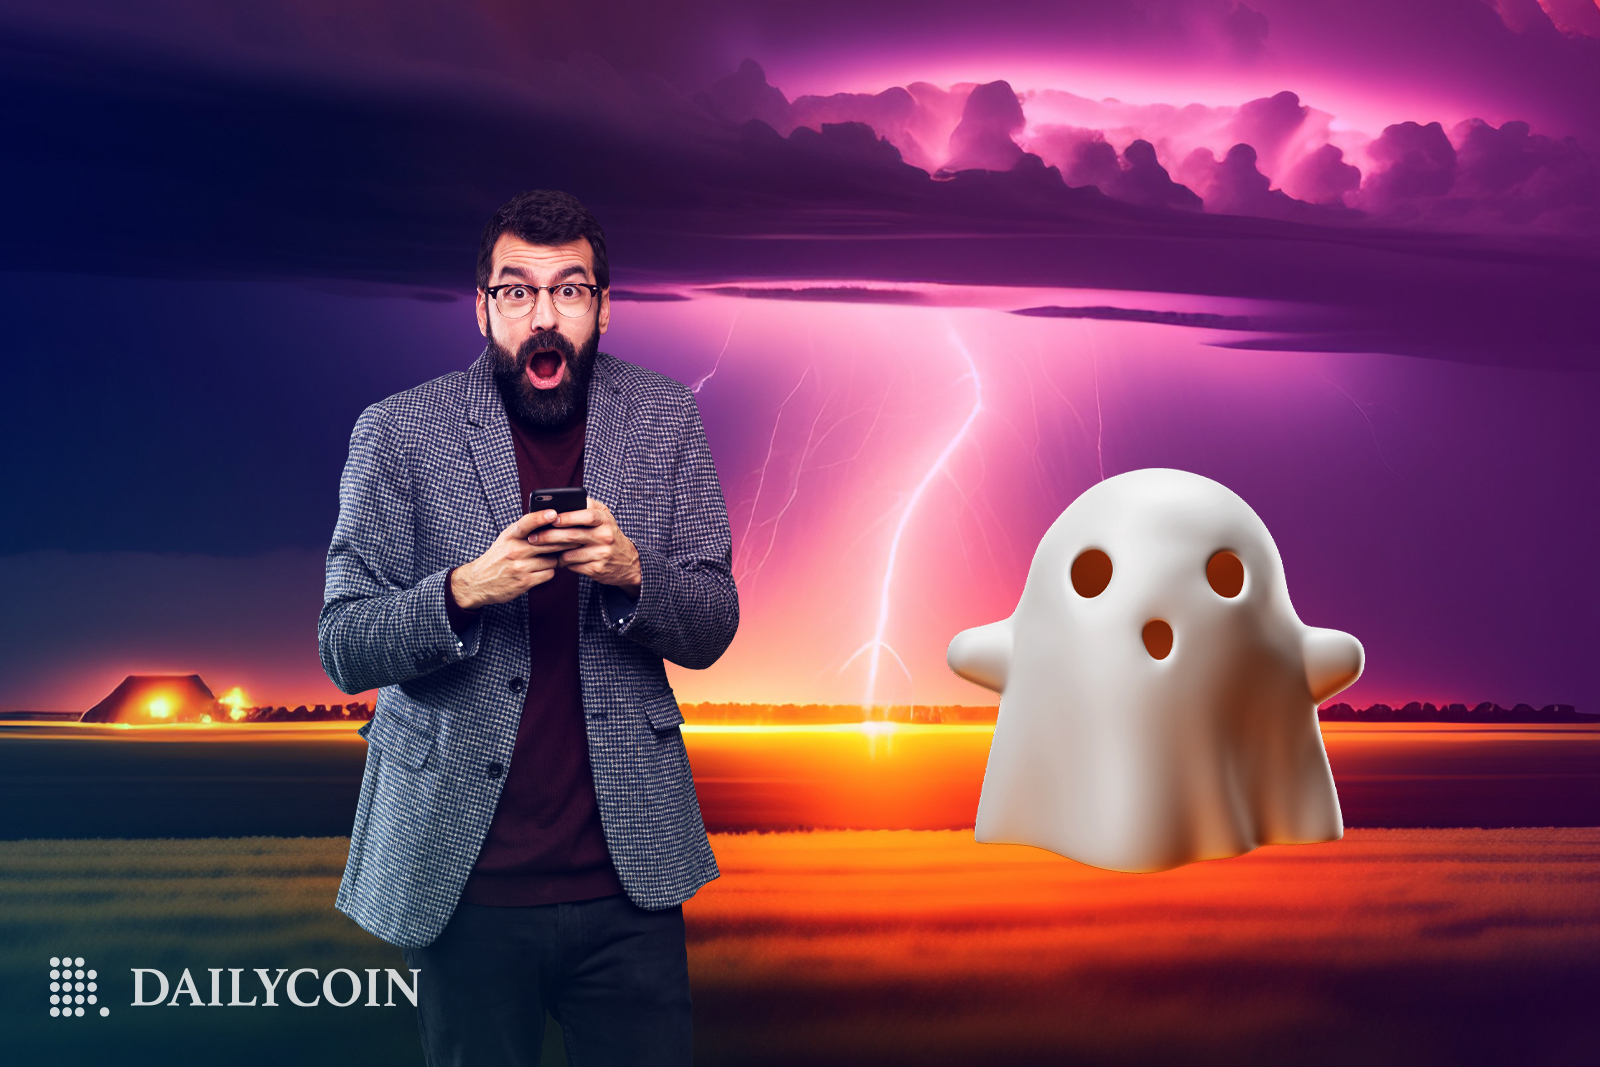 Man shocked holding a phone next to a cute small white ghost in front of a storm with lightning.